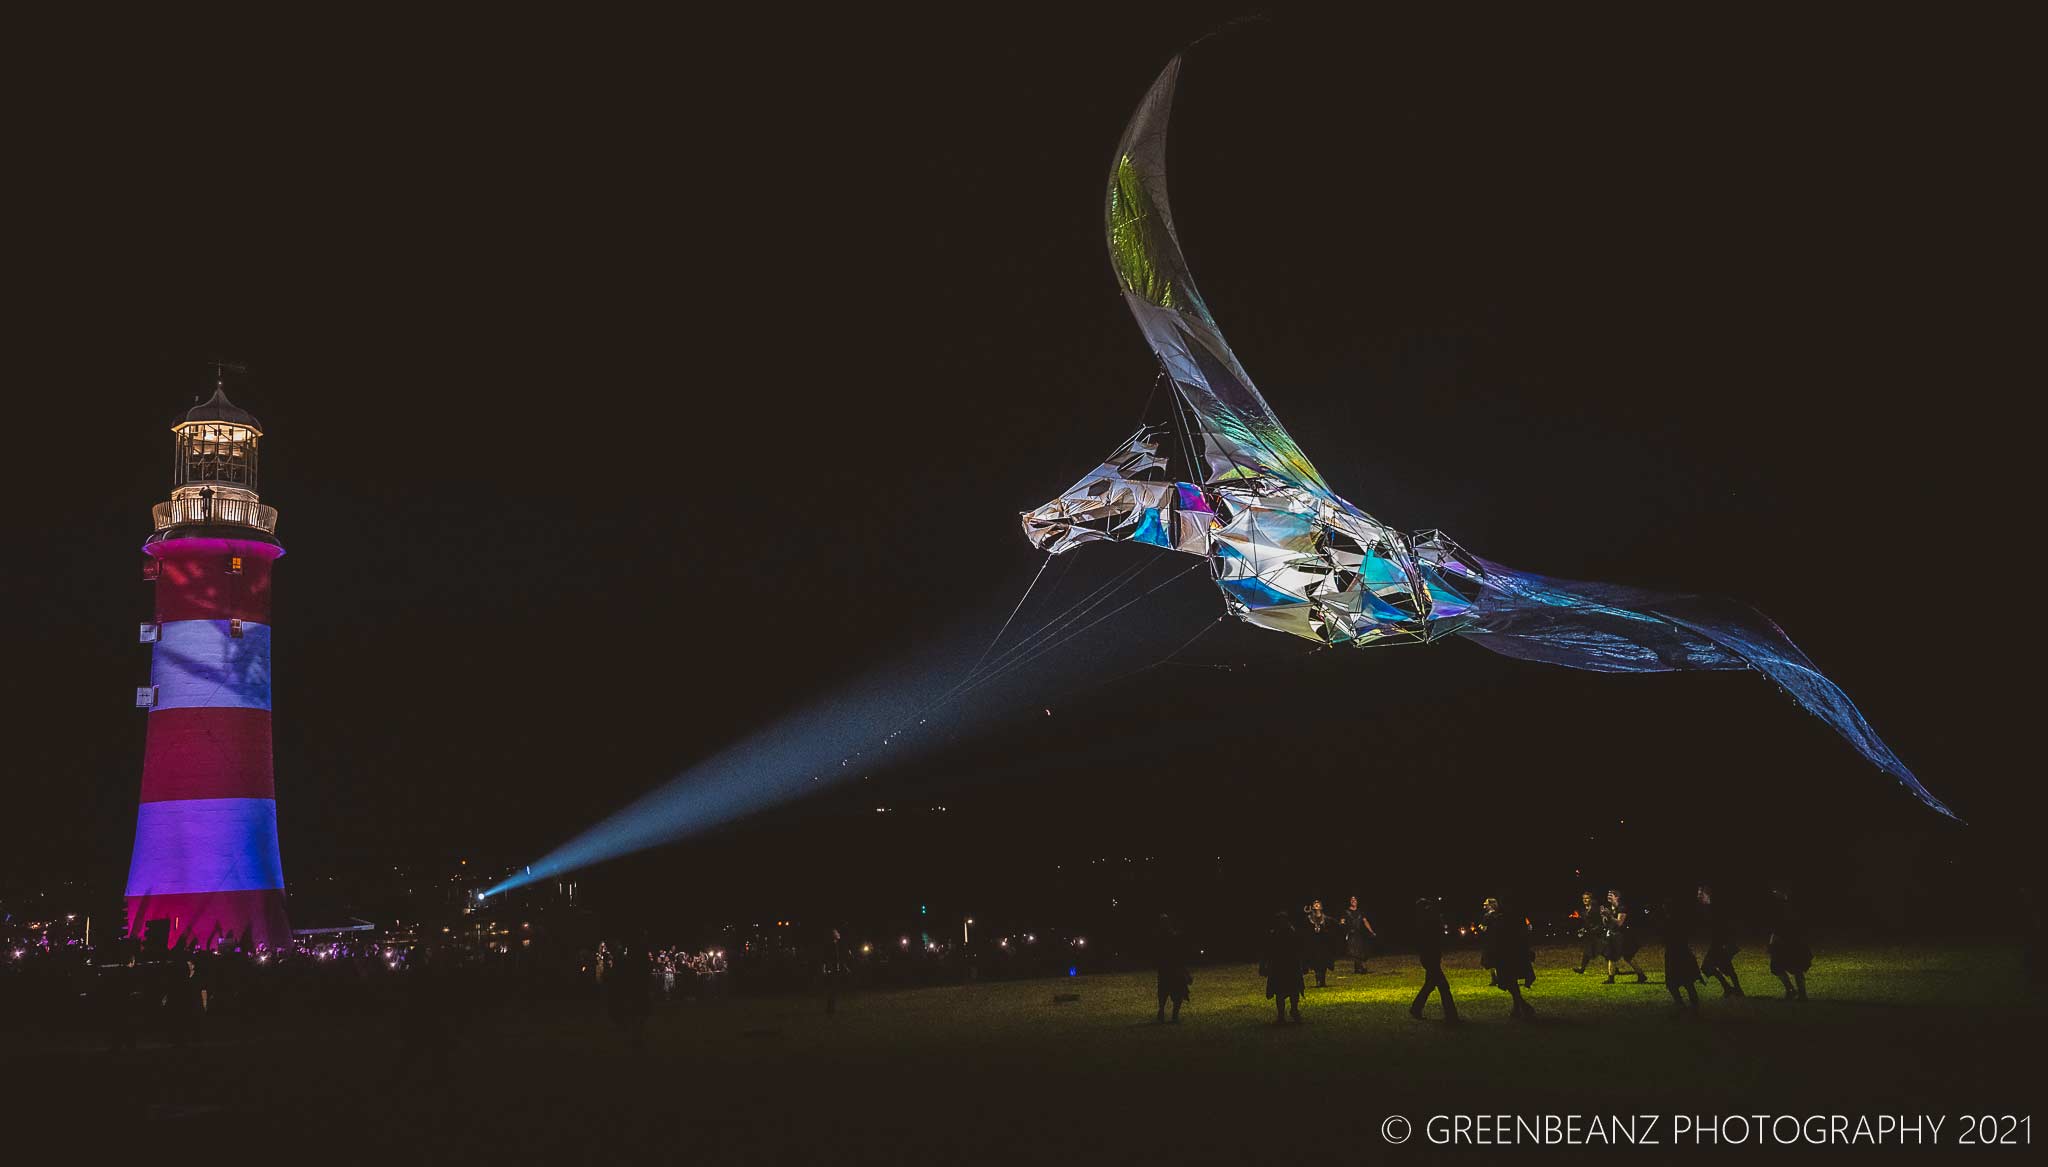 The Hatchling a giant dragon puppet takes flight in Plymouth